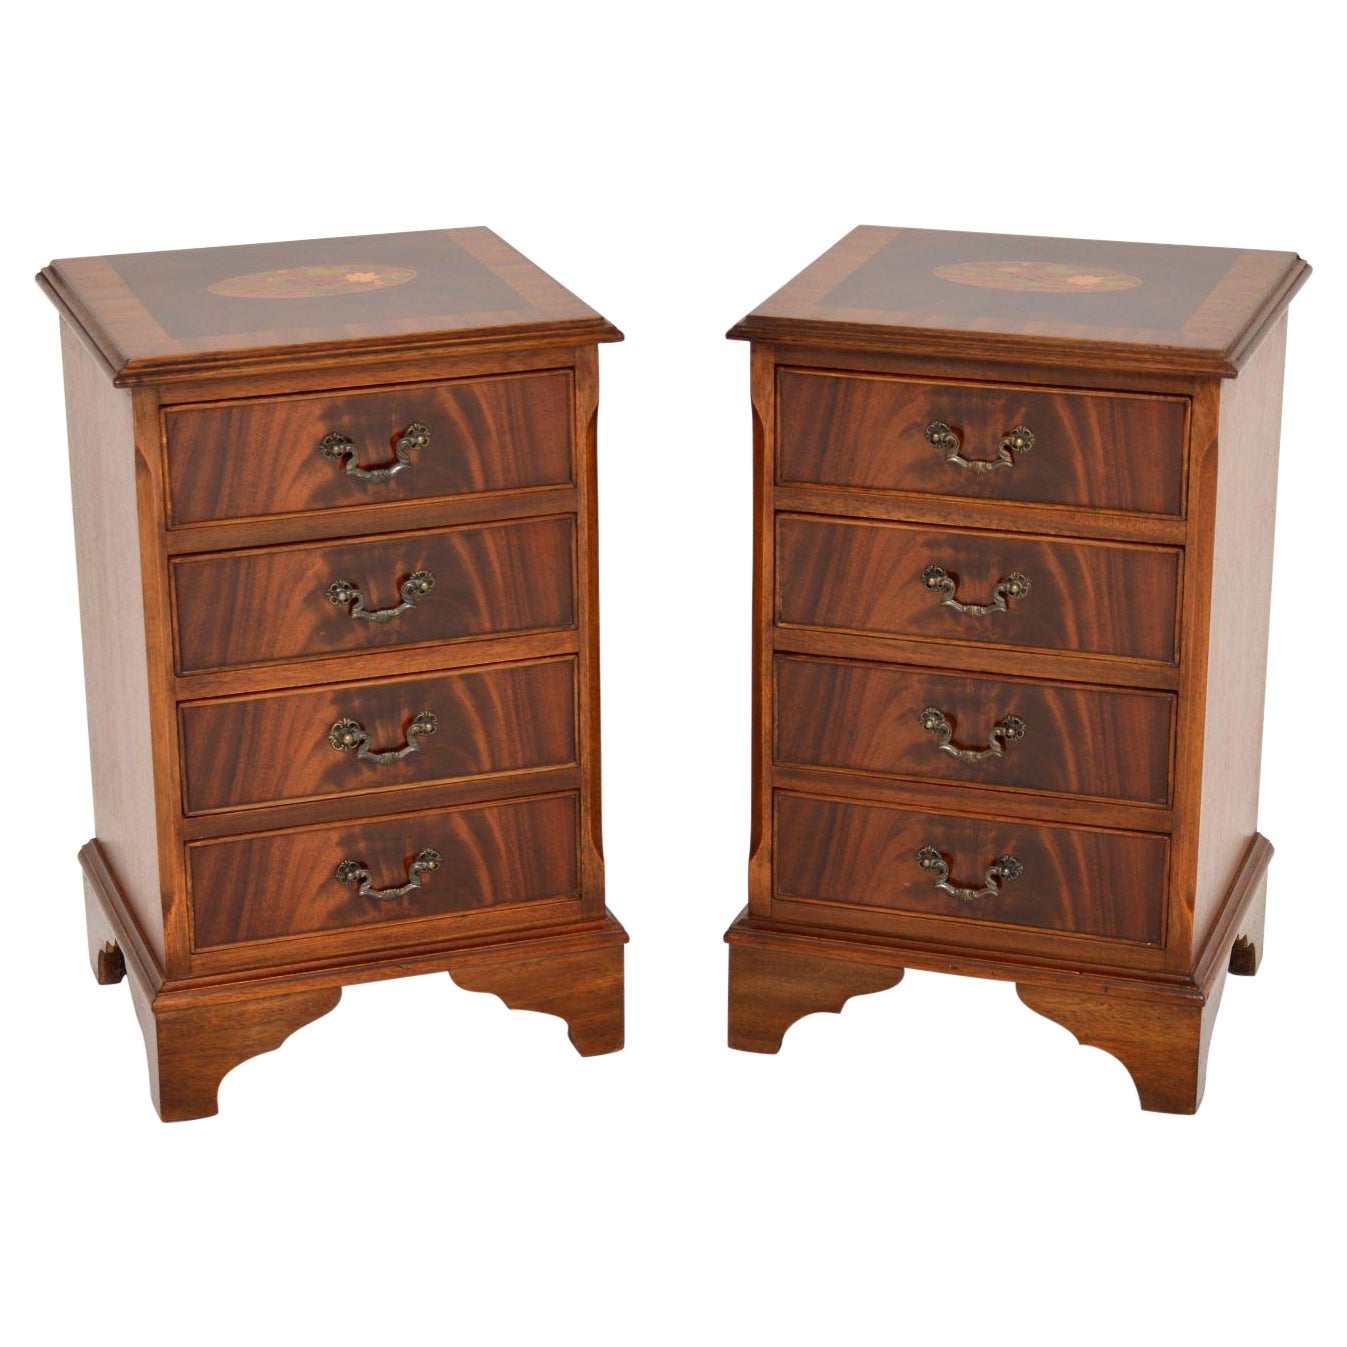 Pair of Antique Georgian Style Inlaid Bedside Chests